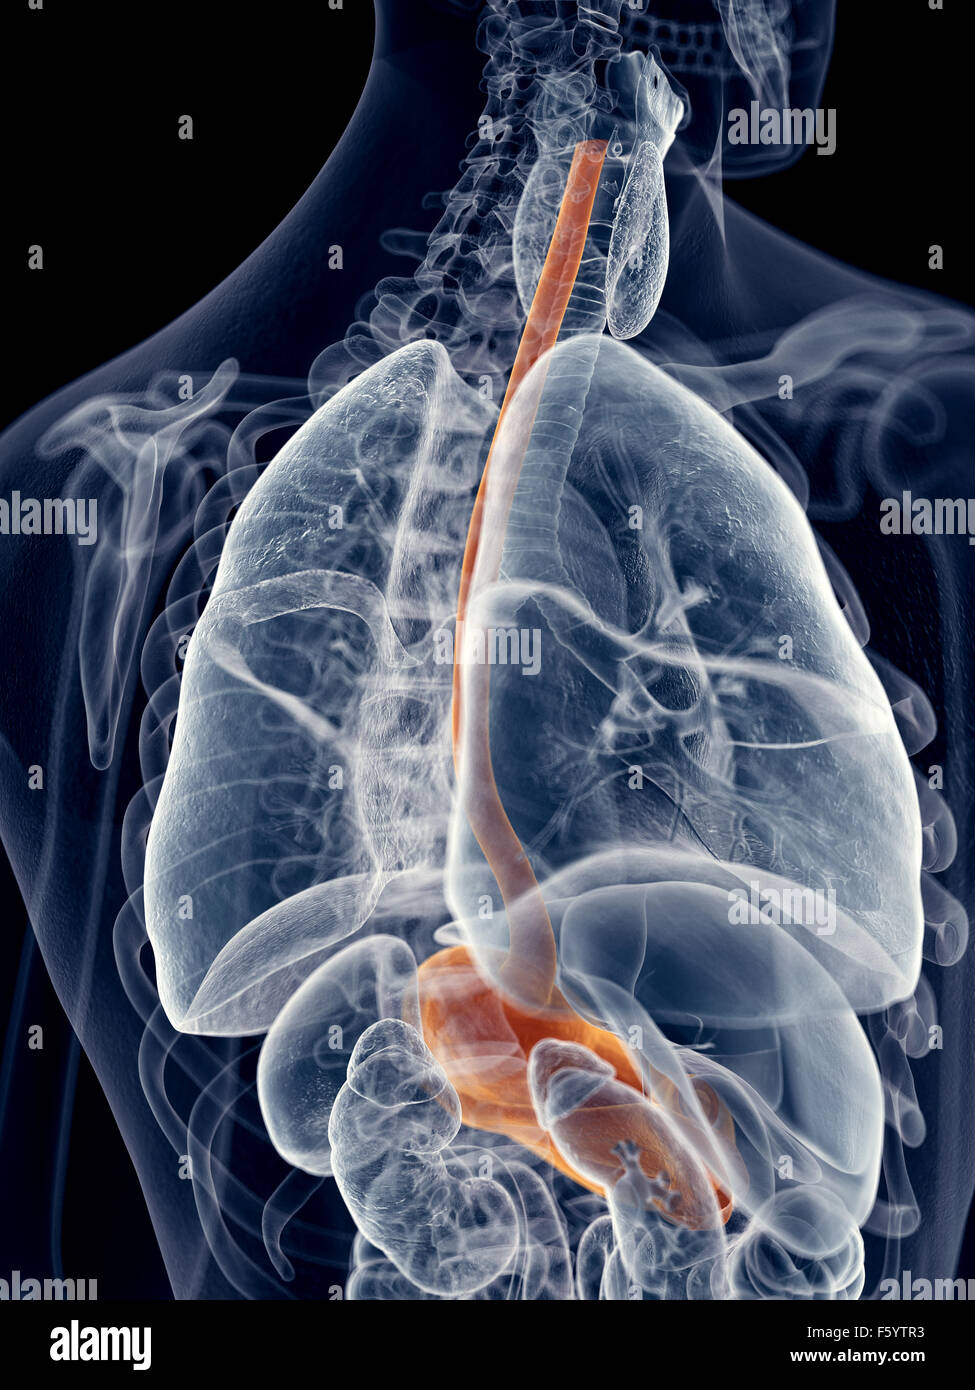 medically accurate illustration of the esophagus Stock Photo